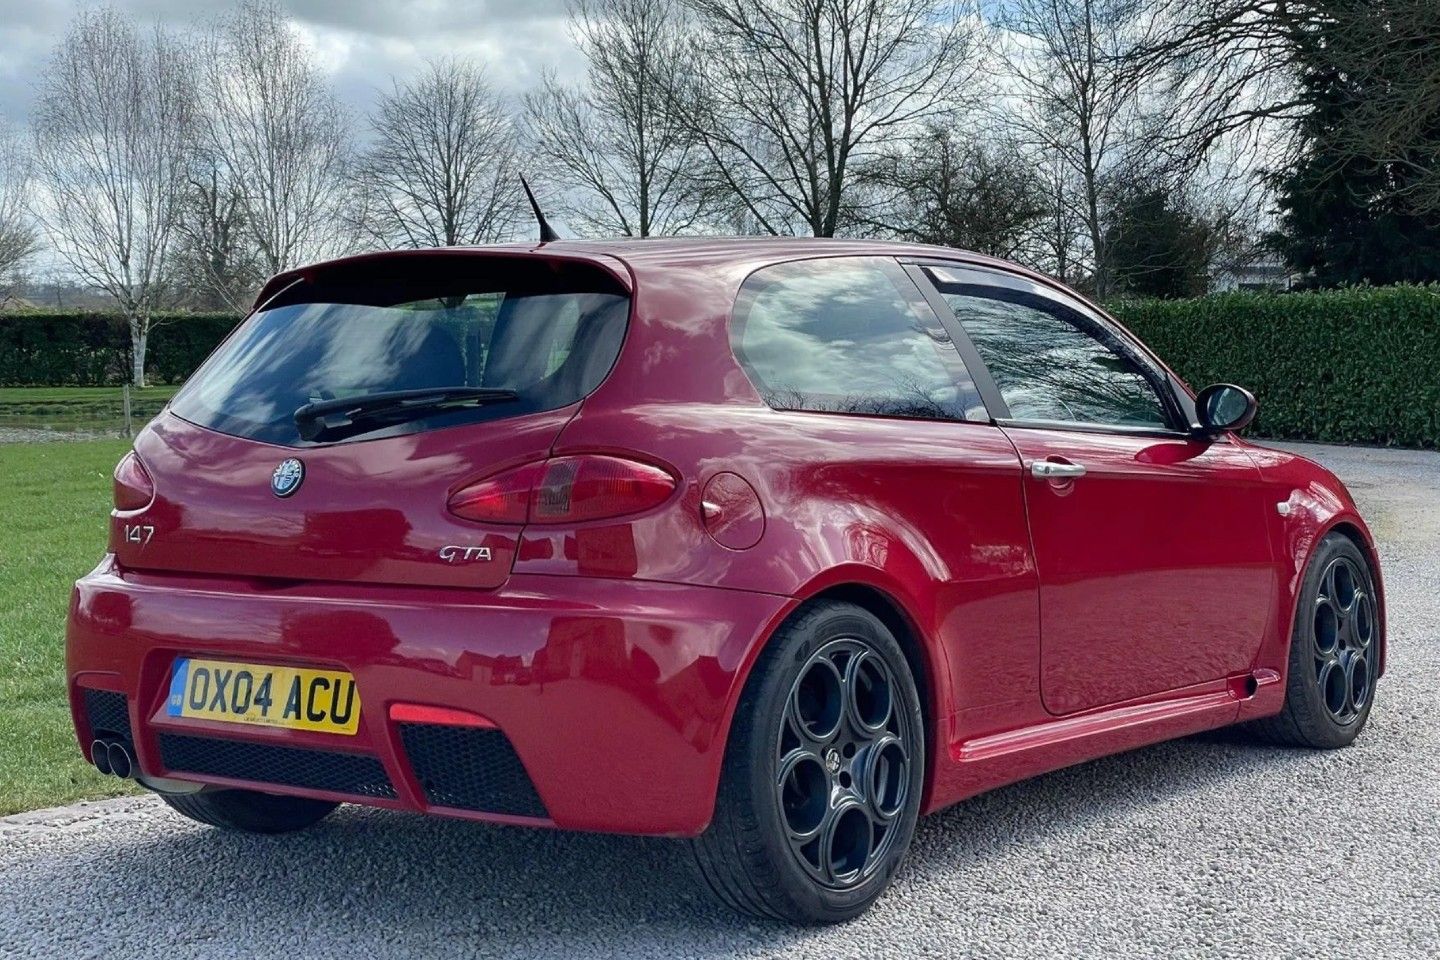 The Awesome Alfa Romeo 147 GTA. The hottest of the hot hatchbacks